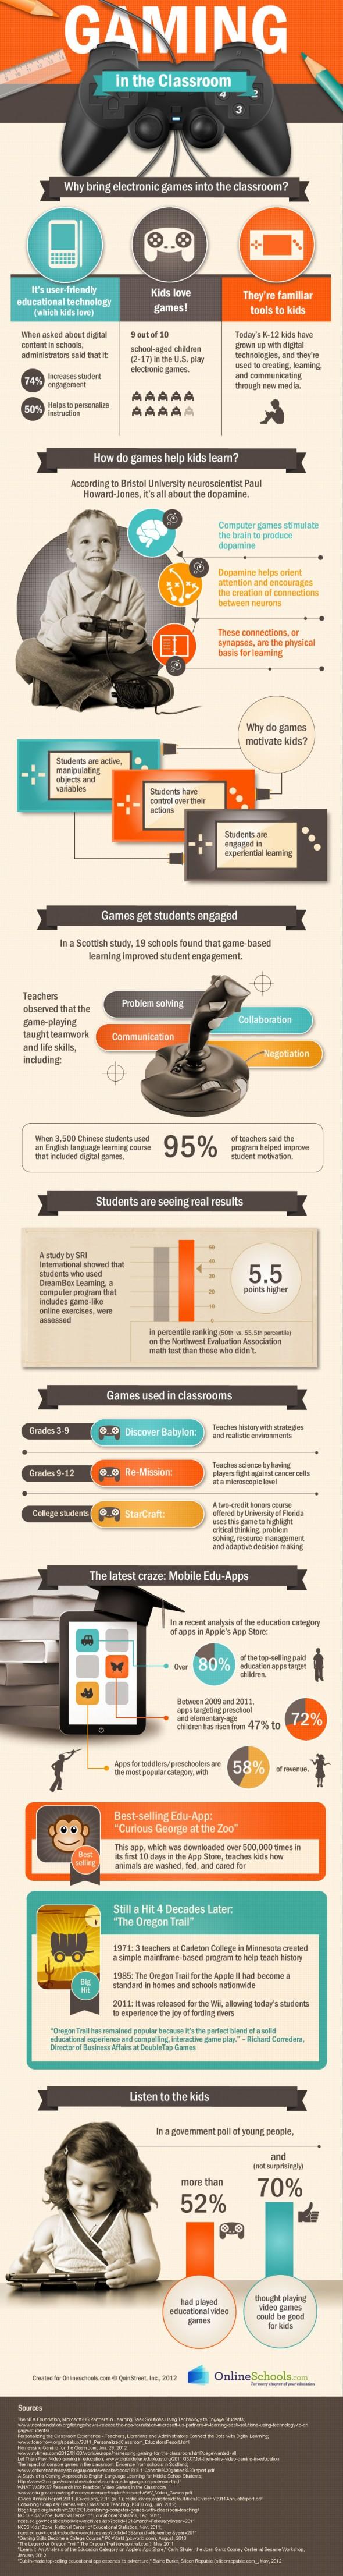 Guide to Gaming in Classroom Infographic